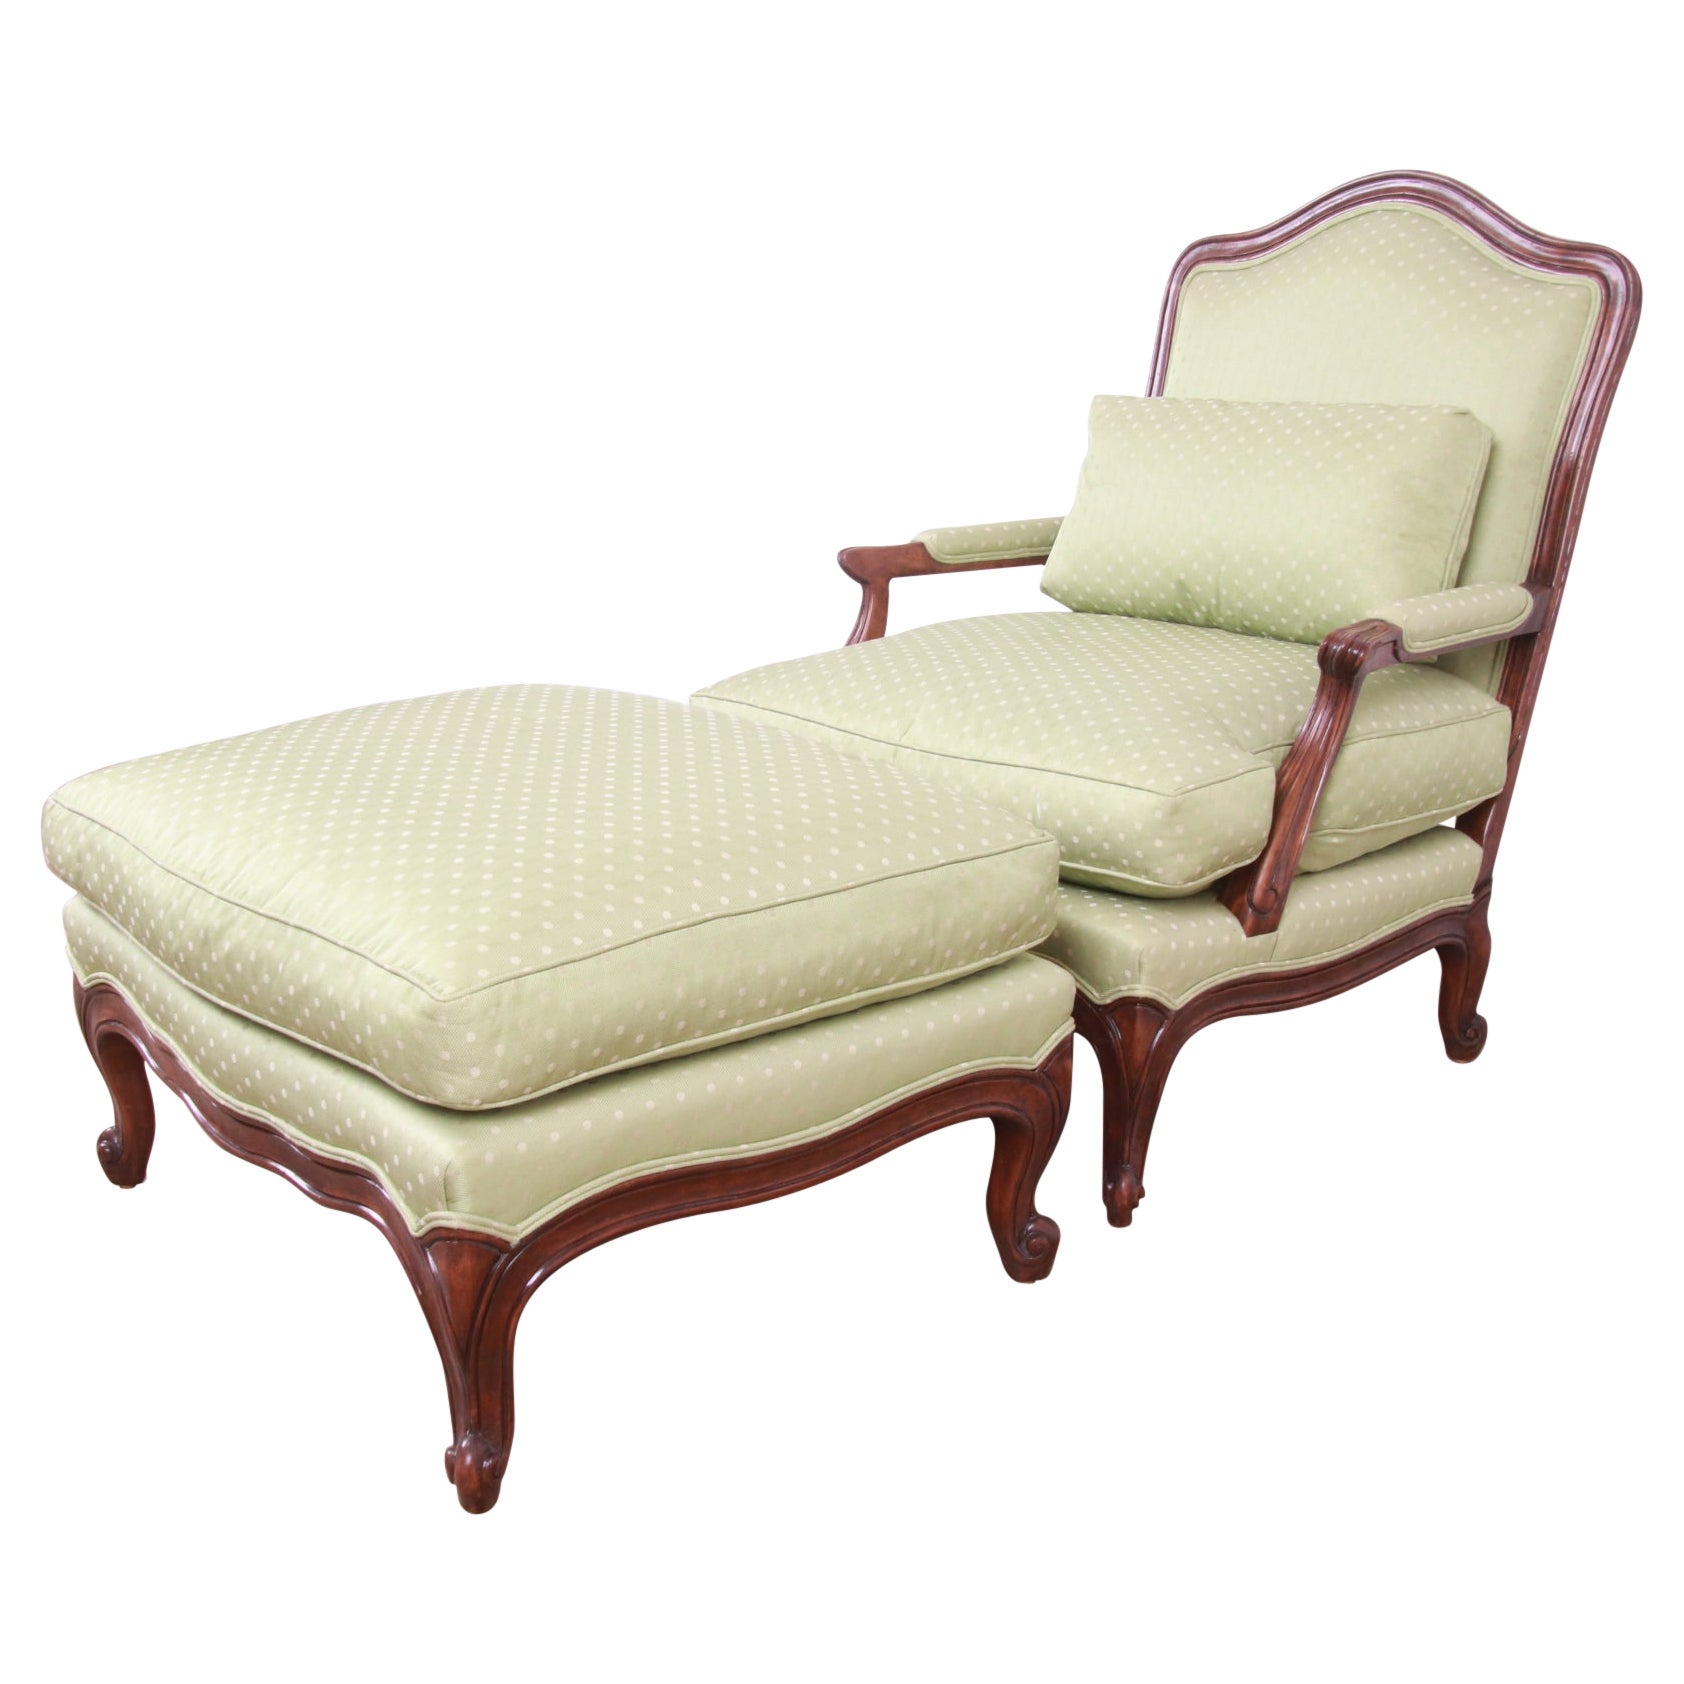 Minton-Spidell French Provincial Carved Walnut Upholstered Fauteuil with Ottoman